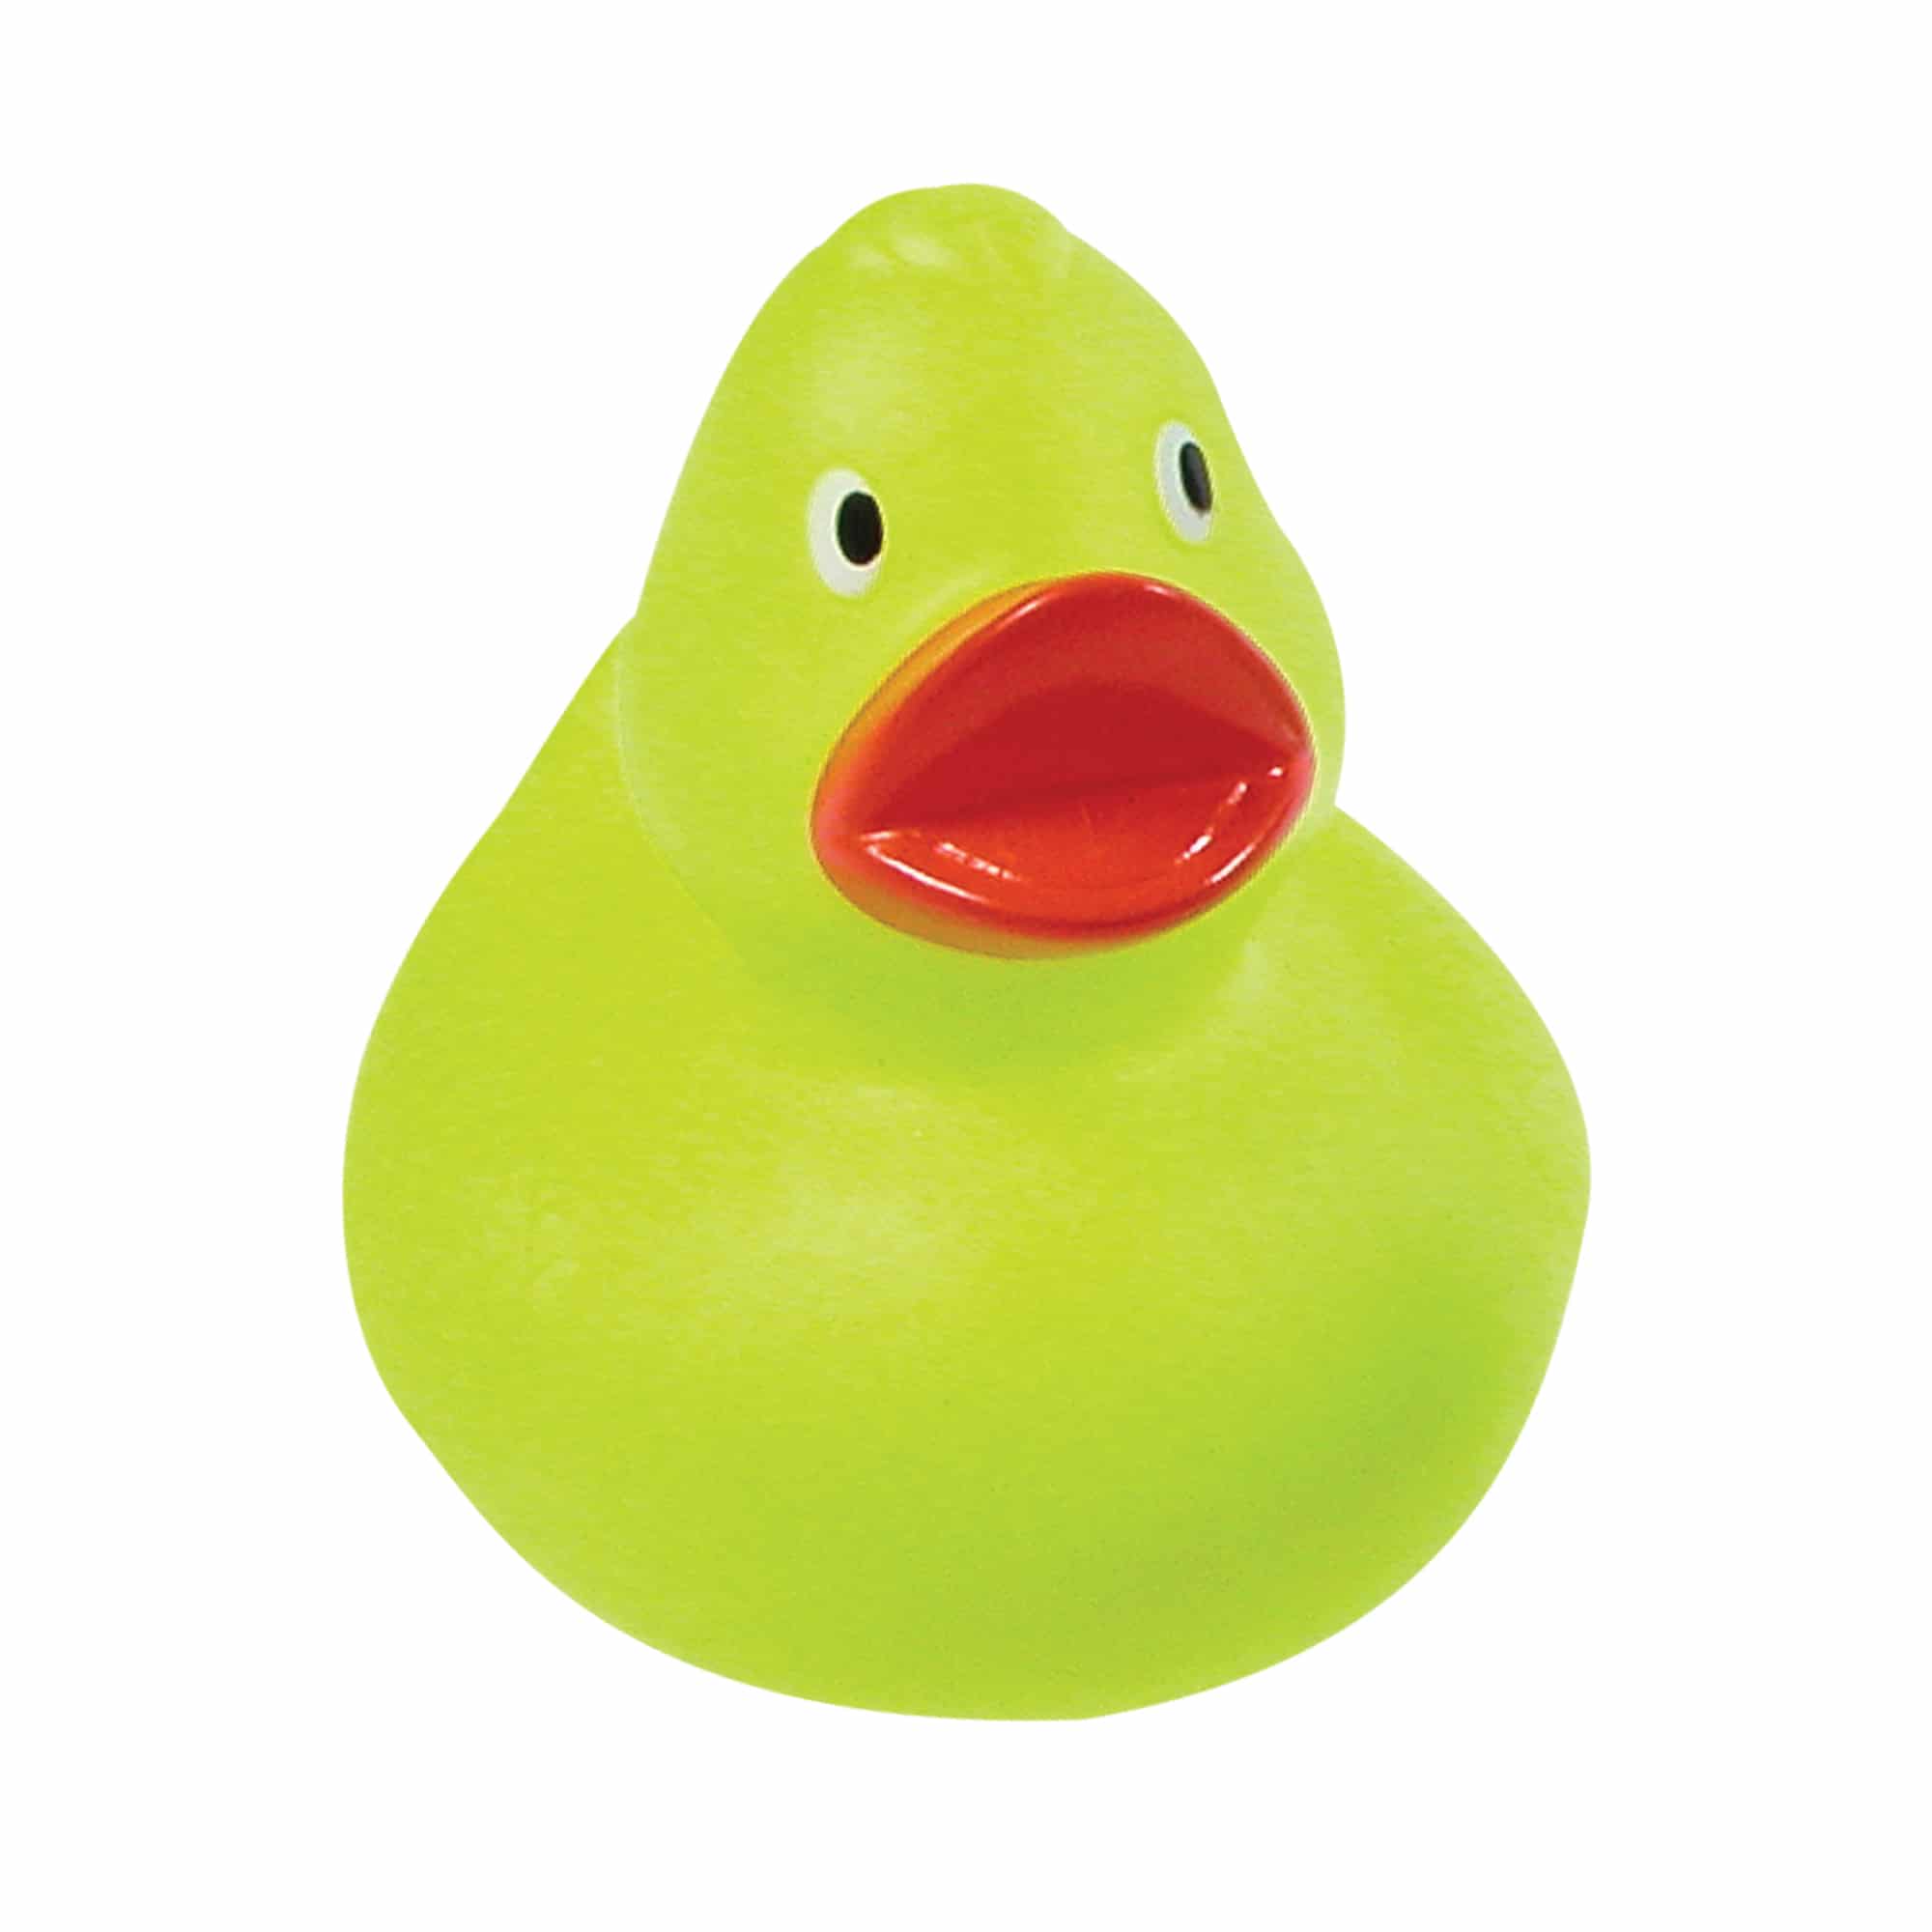 Schylling Rubber Duckies, Multi-Color